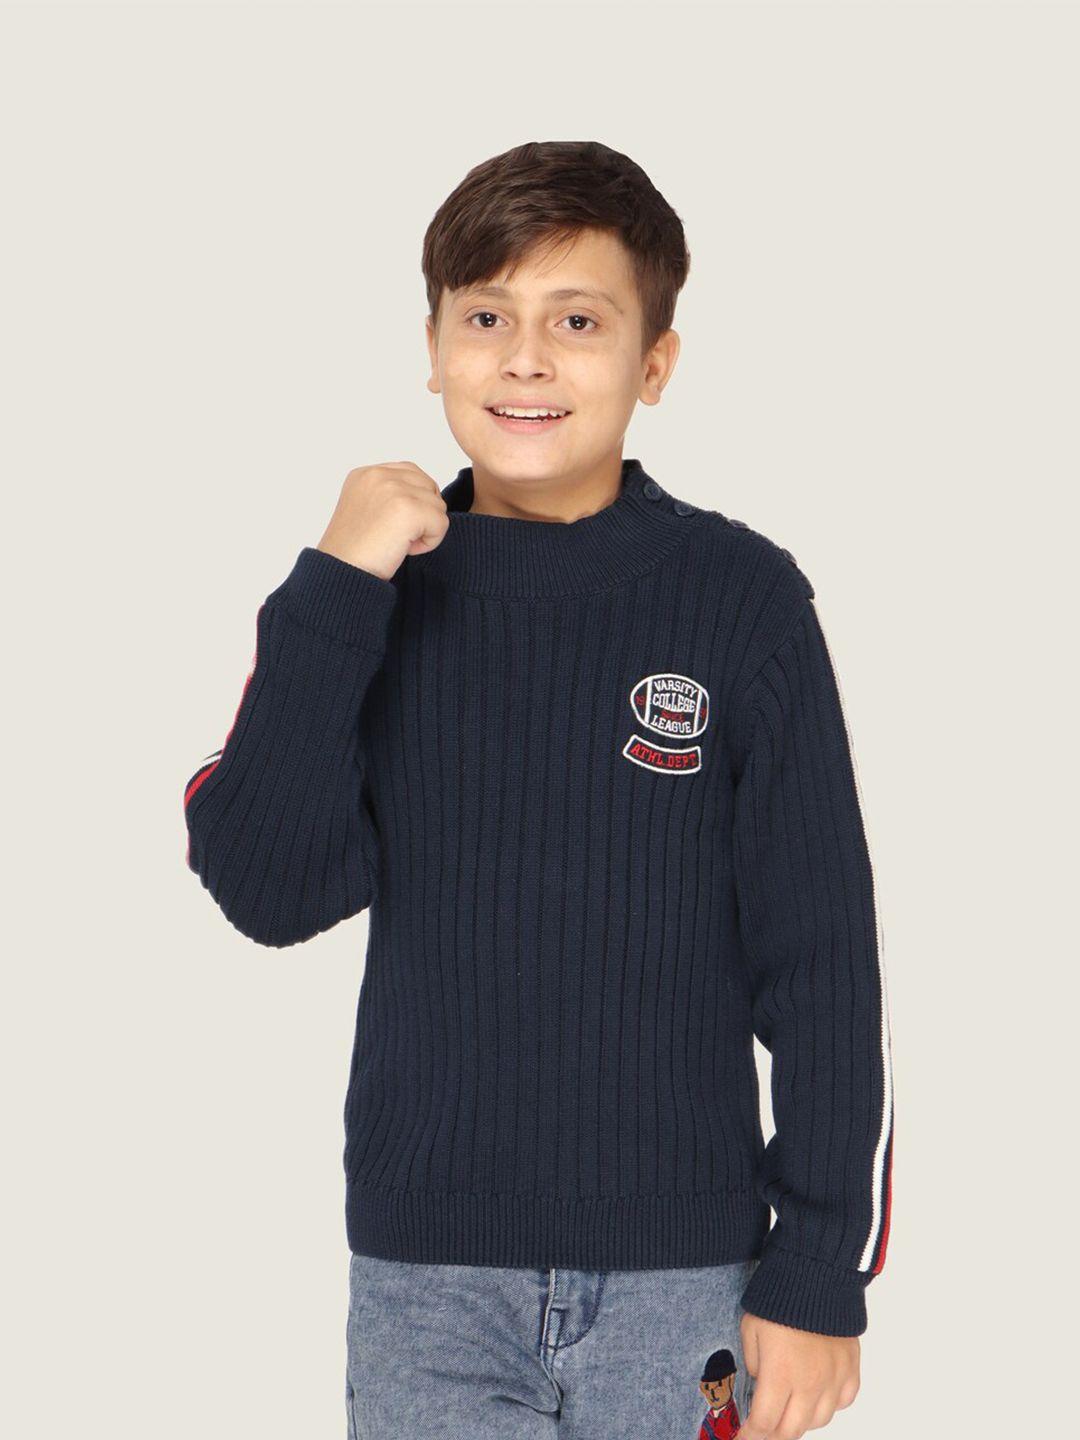 lasnak boys navy blue & red ribbed cotton pullover sweater